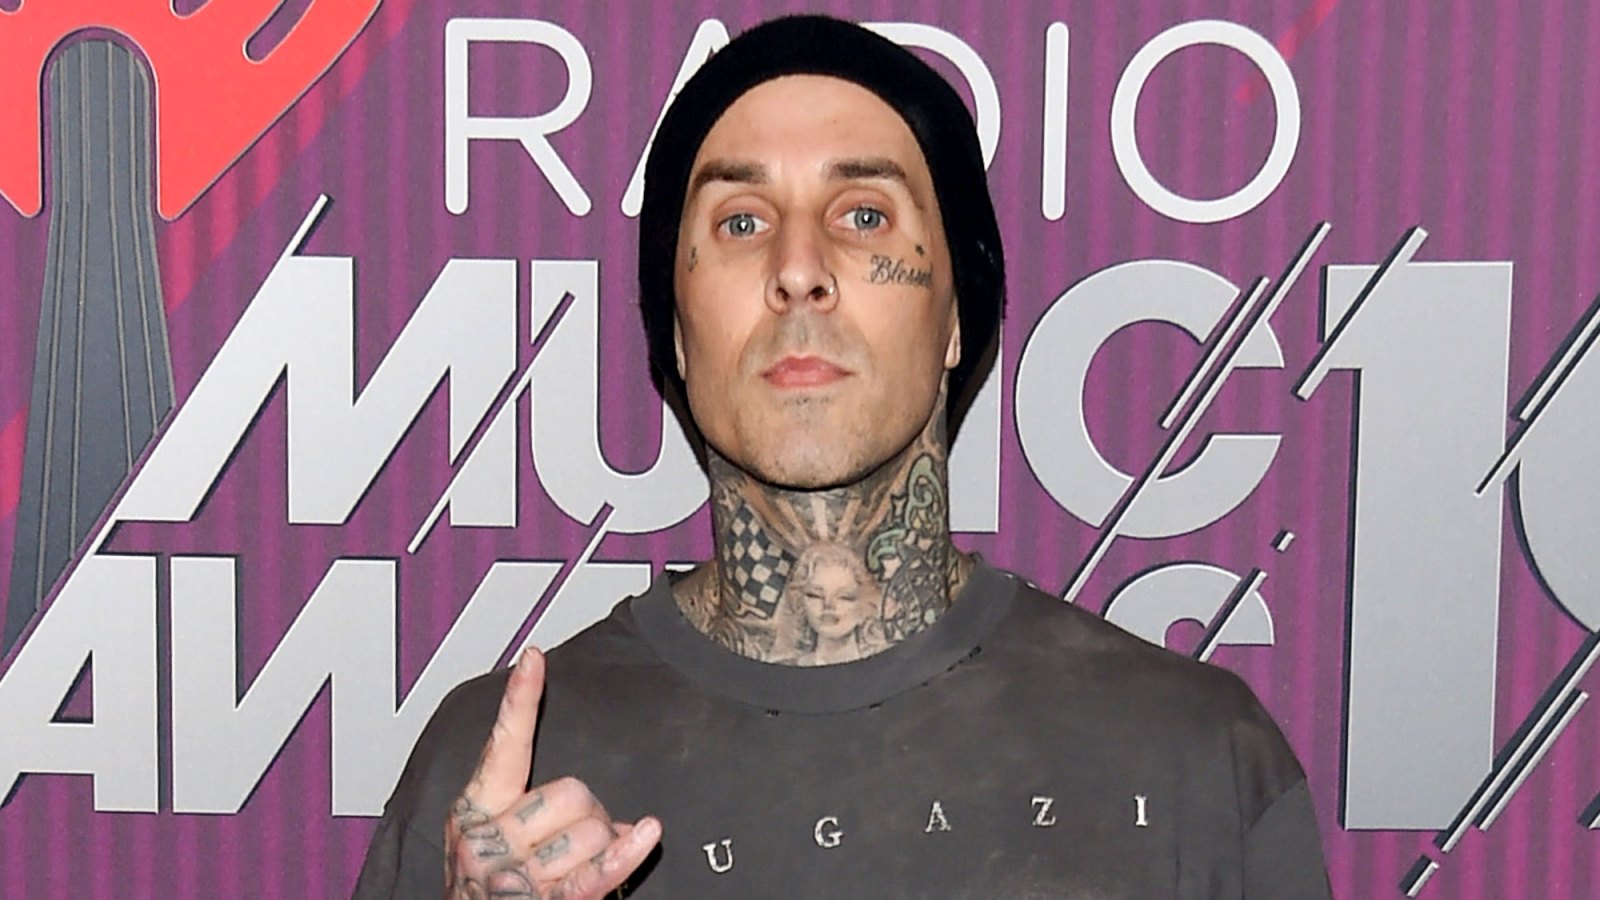 Inside Travis Barker's Recovery After Pancreatitis: He's 'Taking It Easy